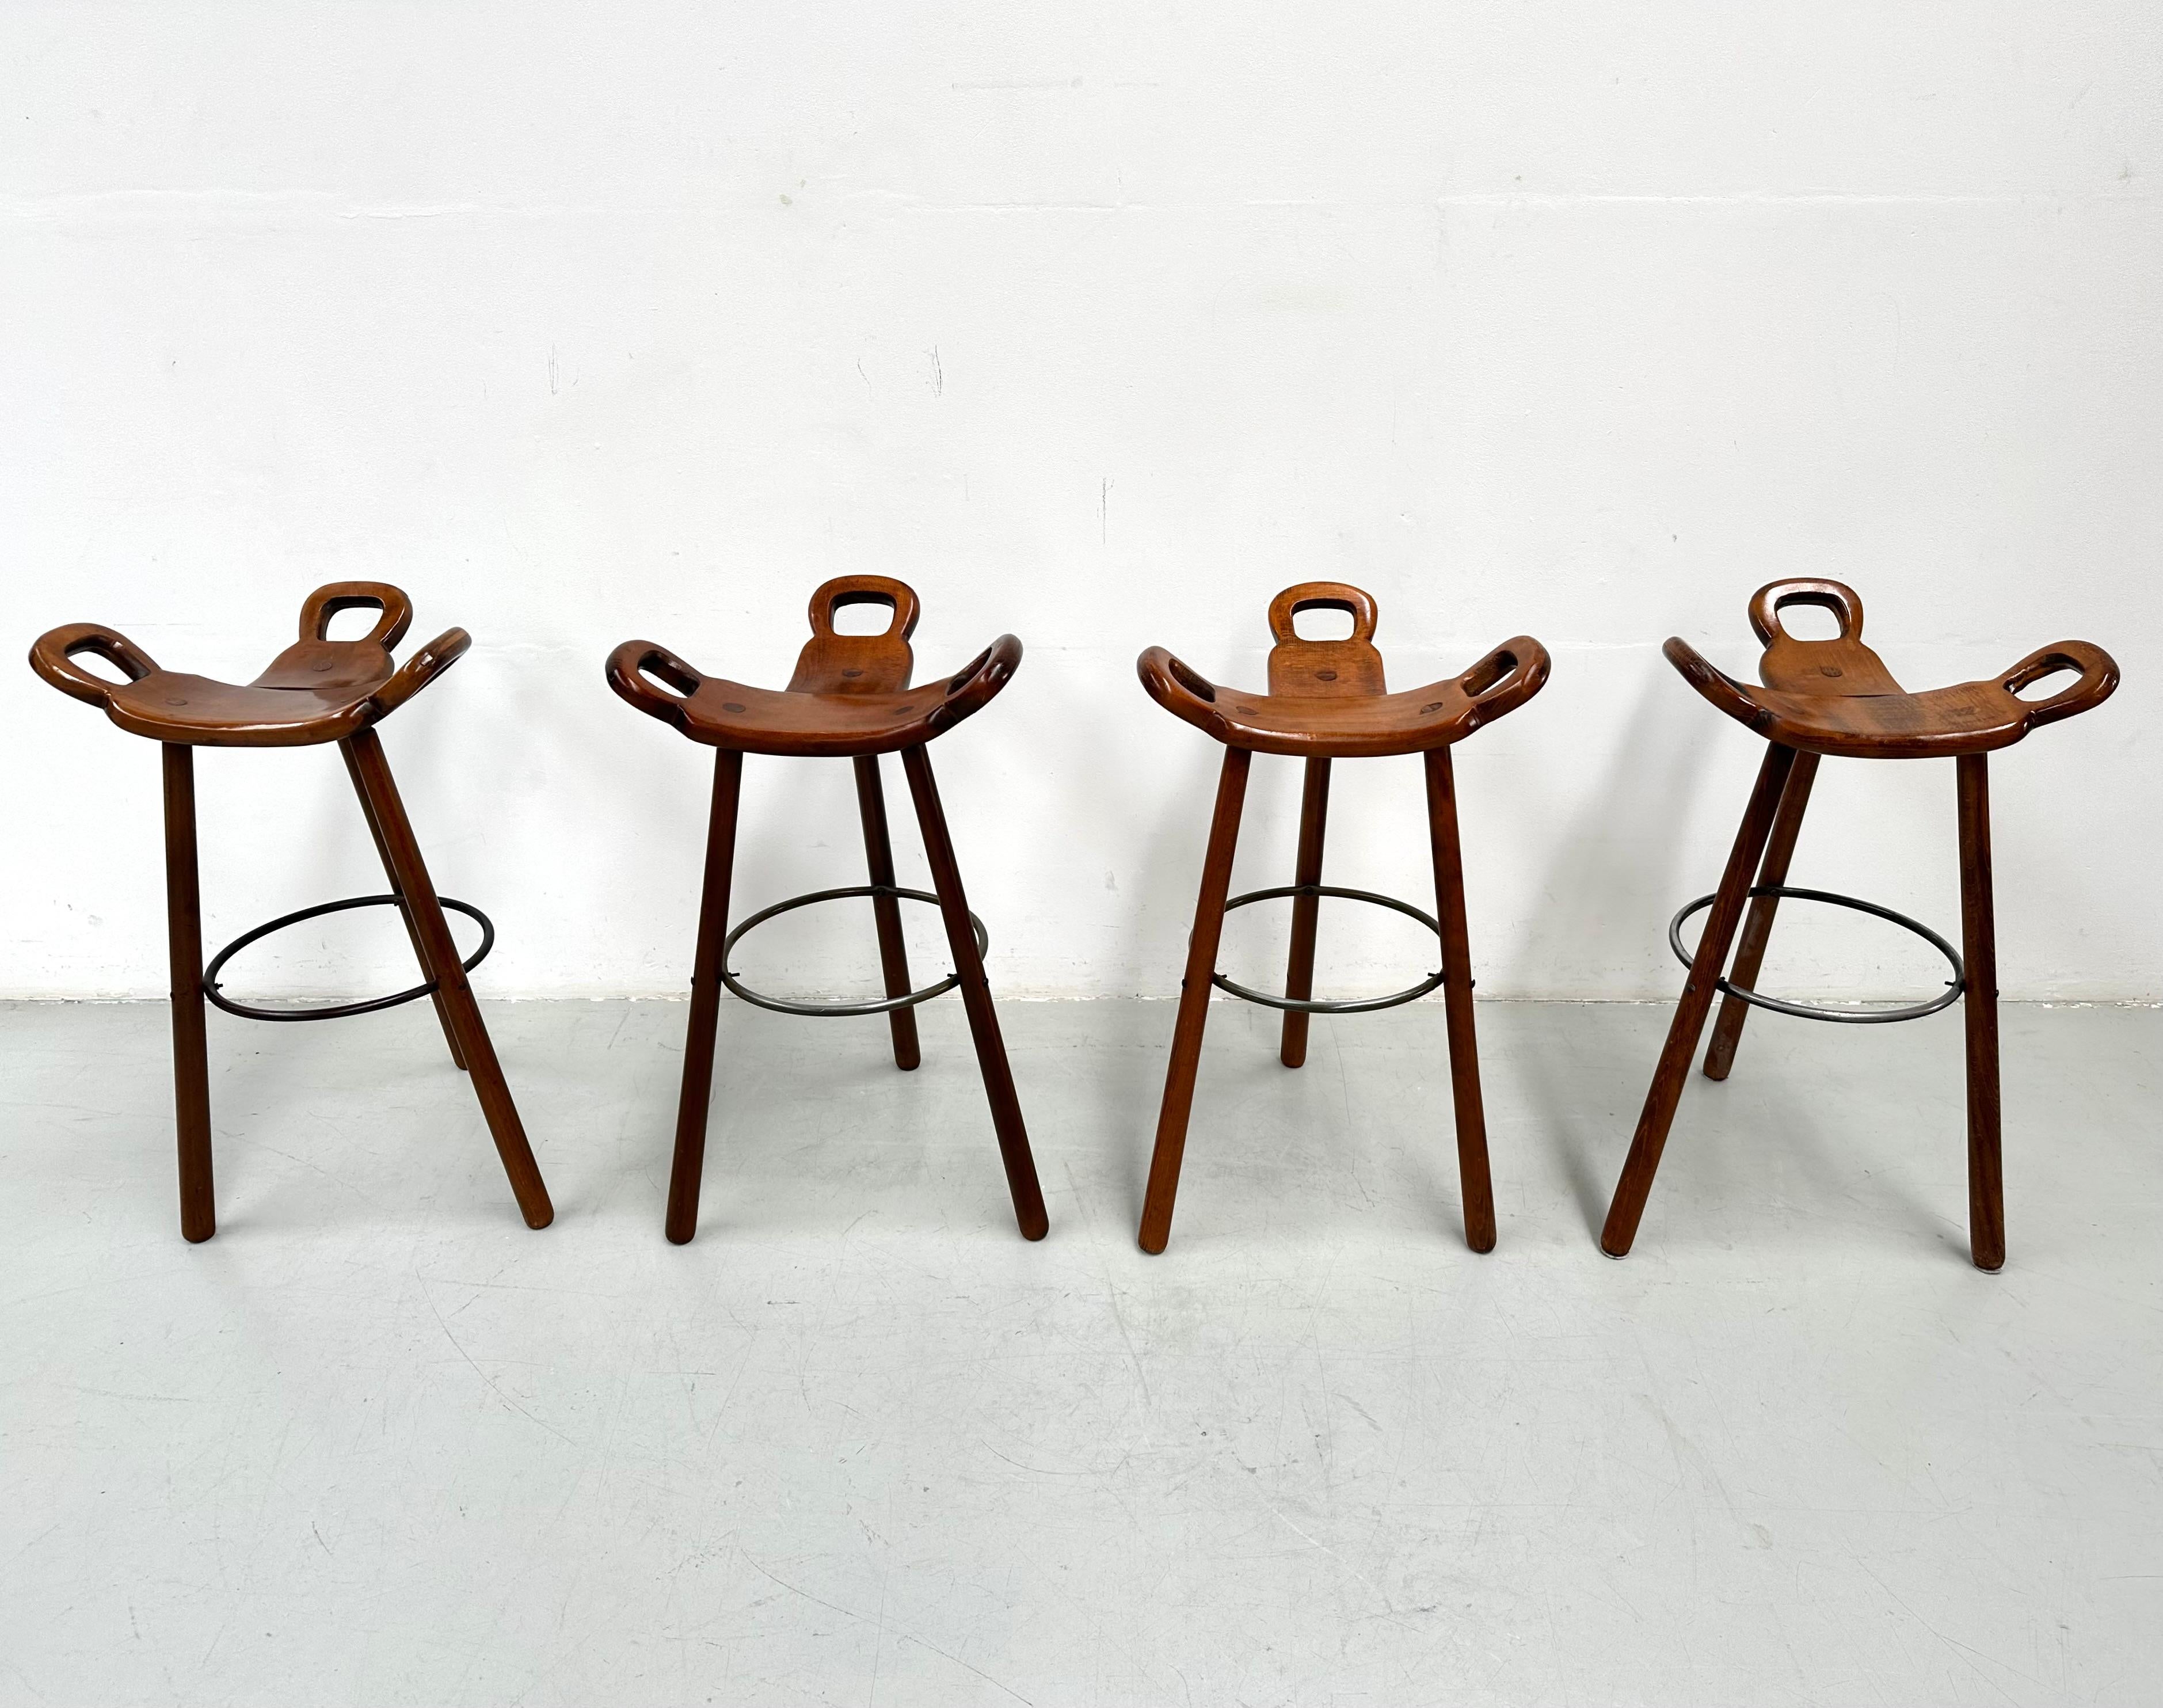 Spanish Set of 4 Marbella Brutalist Stools by Sergio Rodrigues for Confonorm 1970s. For Sale